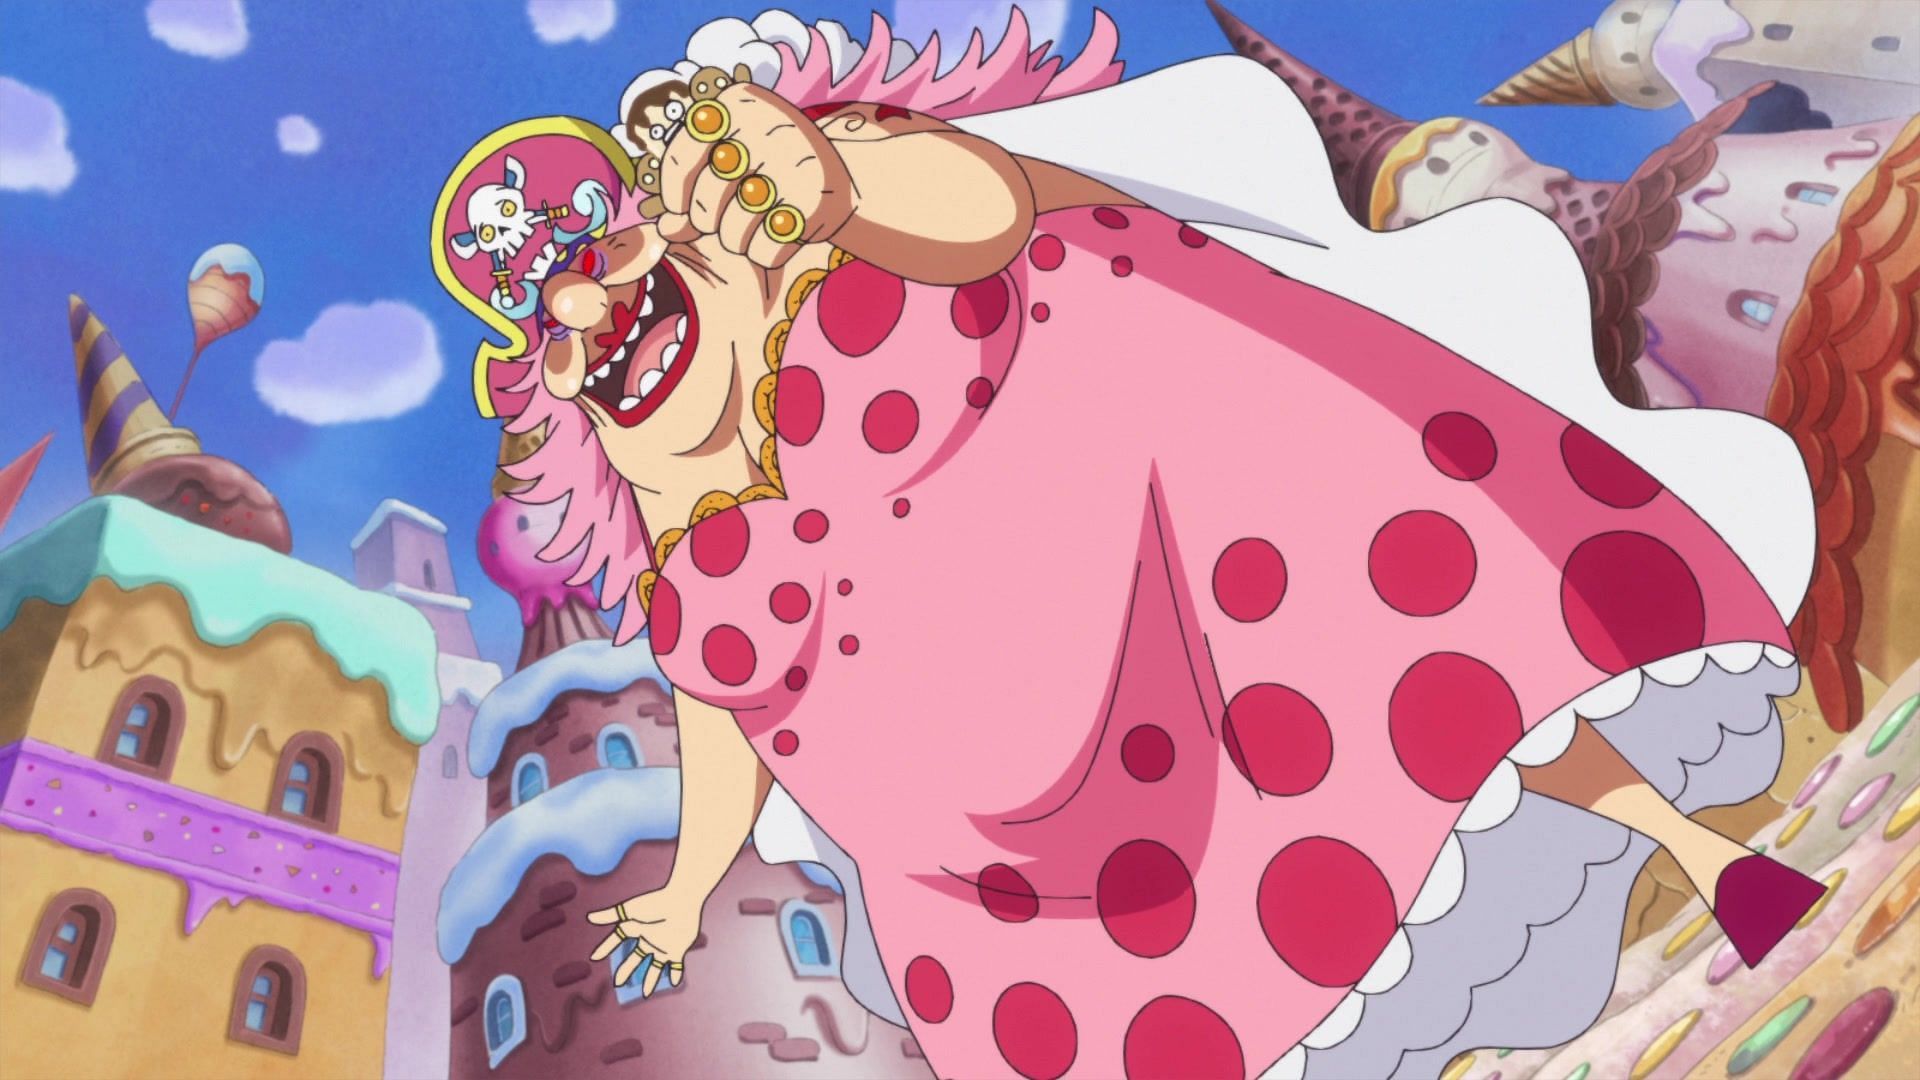 4 One Piece characters who can defeat Big Mom (& 4 she will